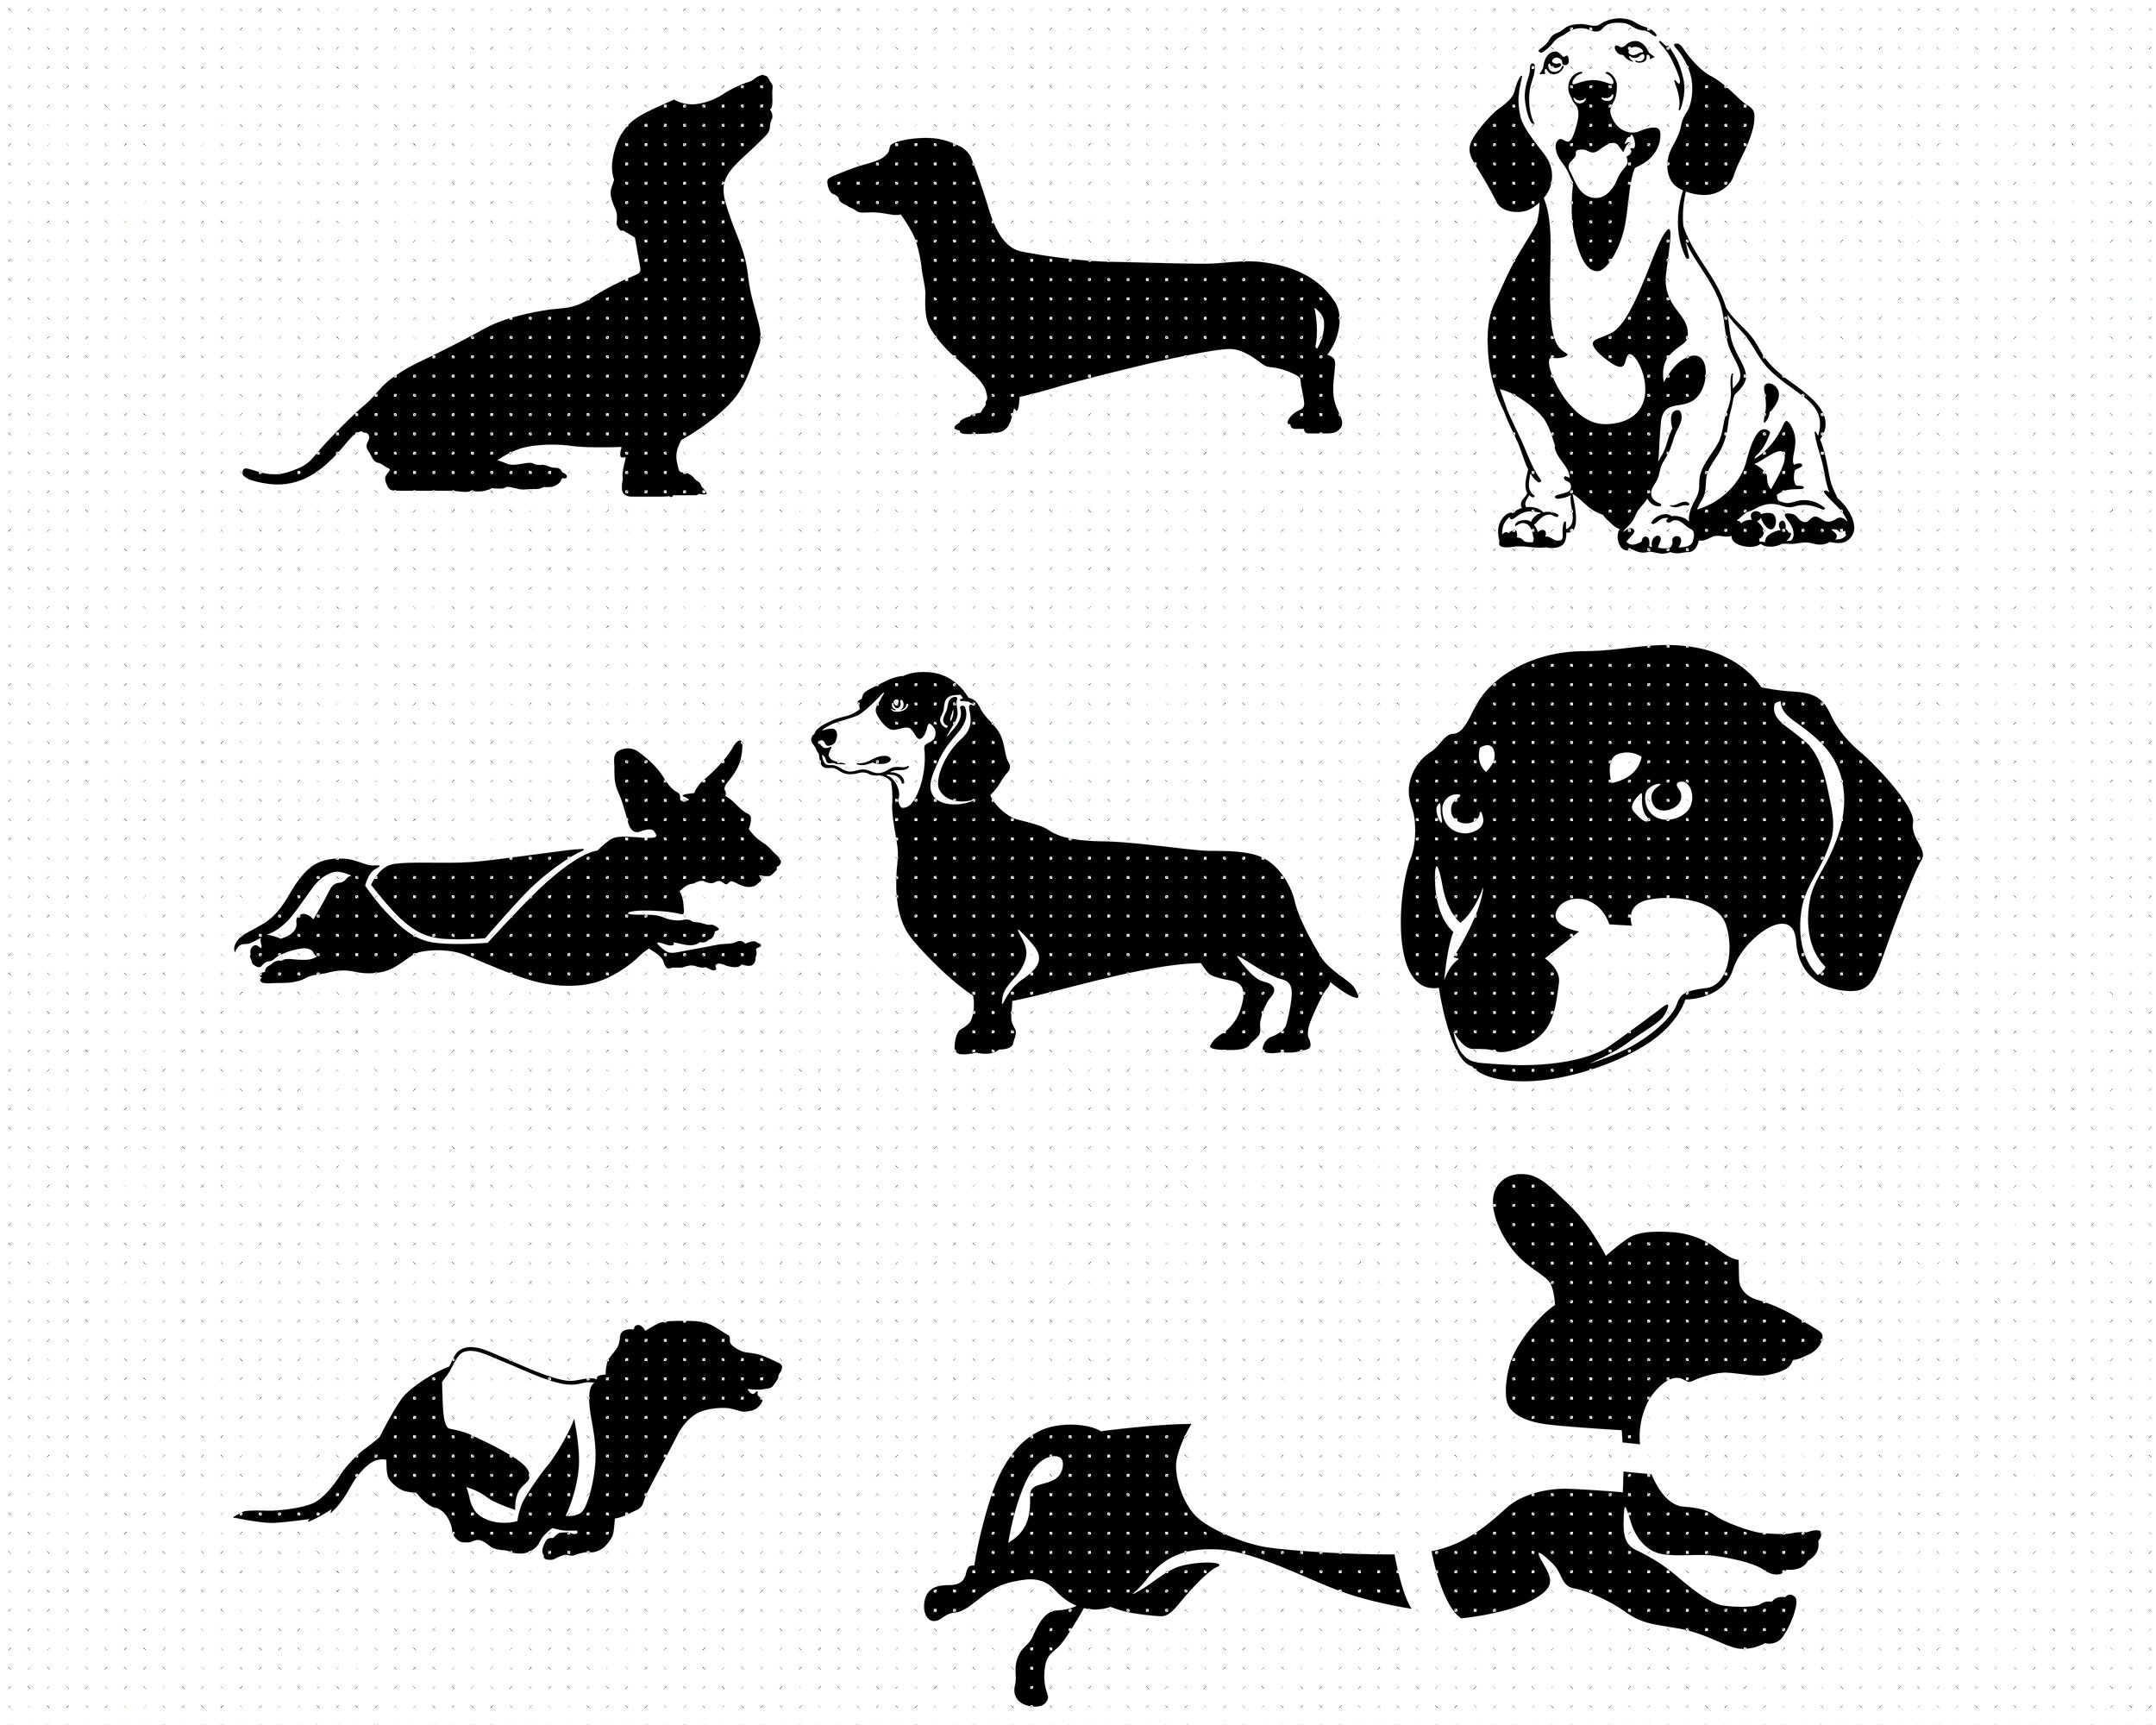 dachshund SVG, dog bundle PNG, DXF, clipart, EPS, vector By CrafterOks